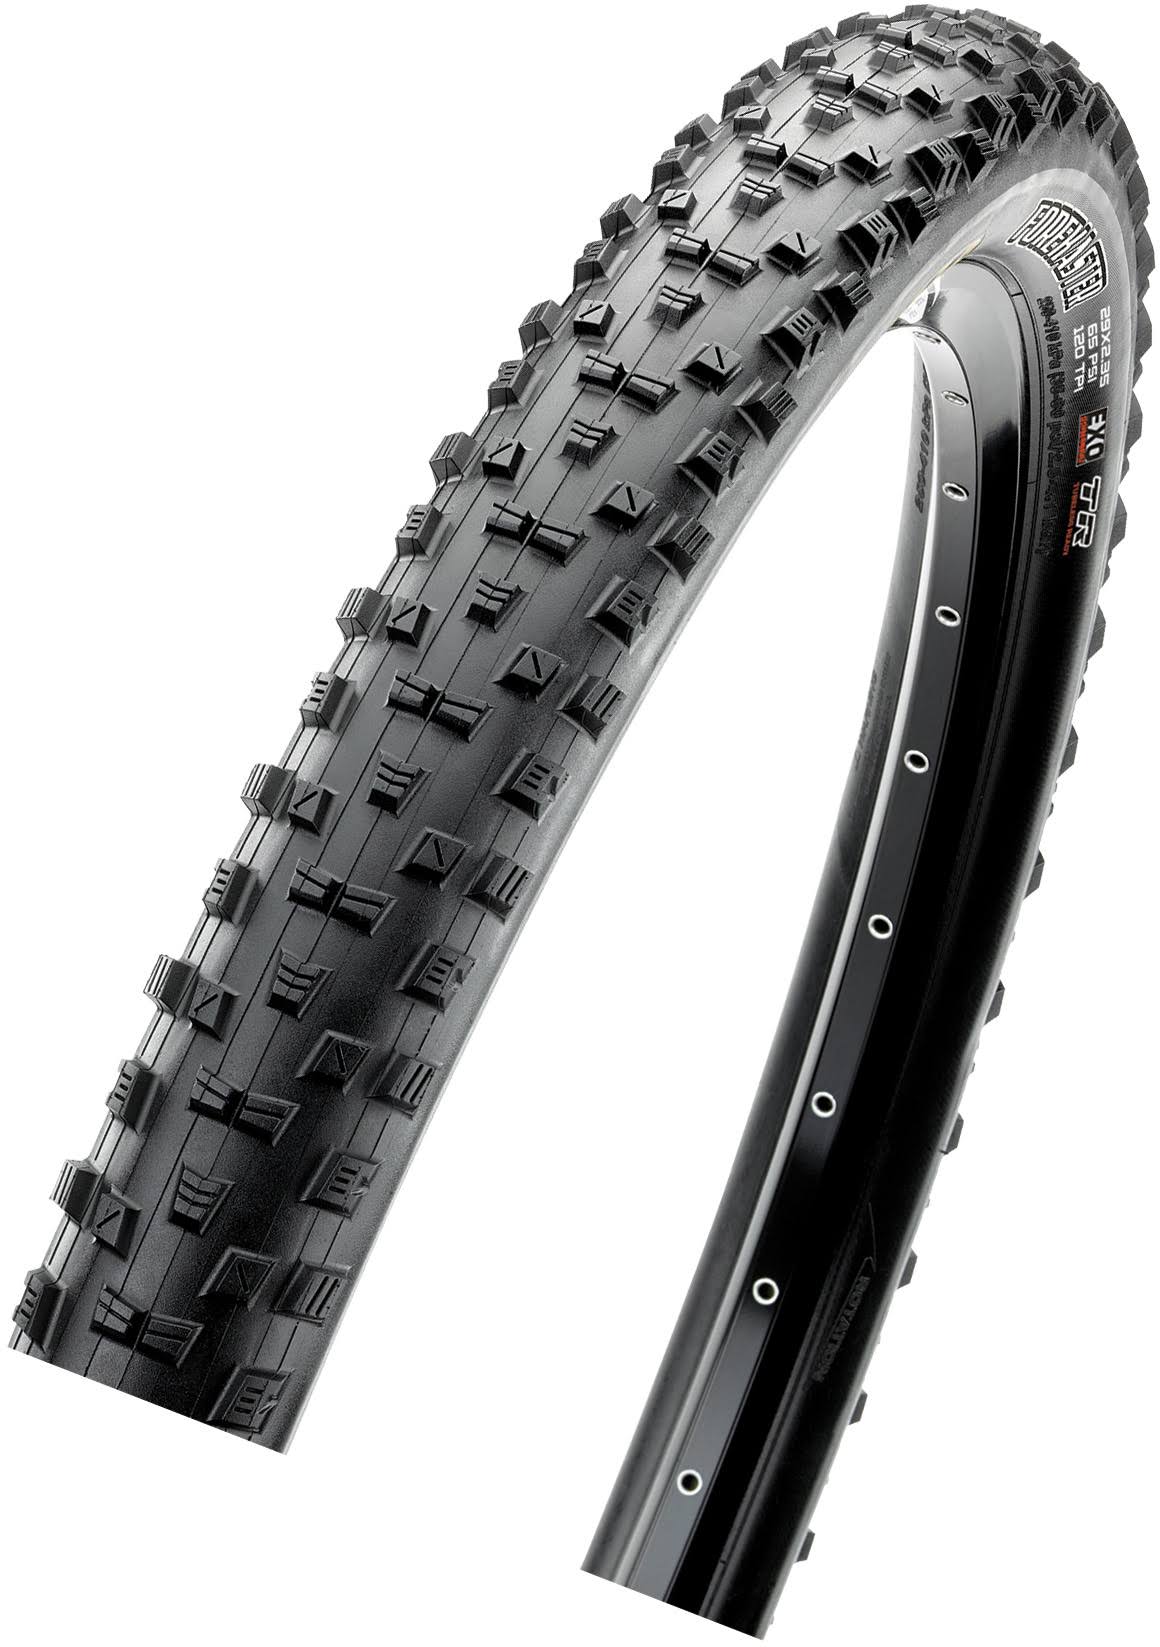 Maxxis Forekaster Dual Compound EXO Tubeless Ready Tire - 27.5"x2.35"